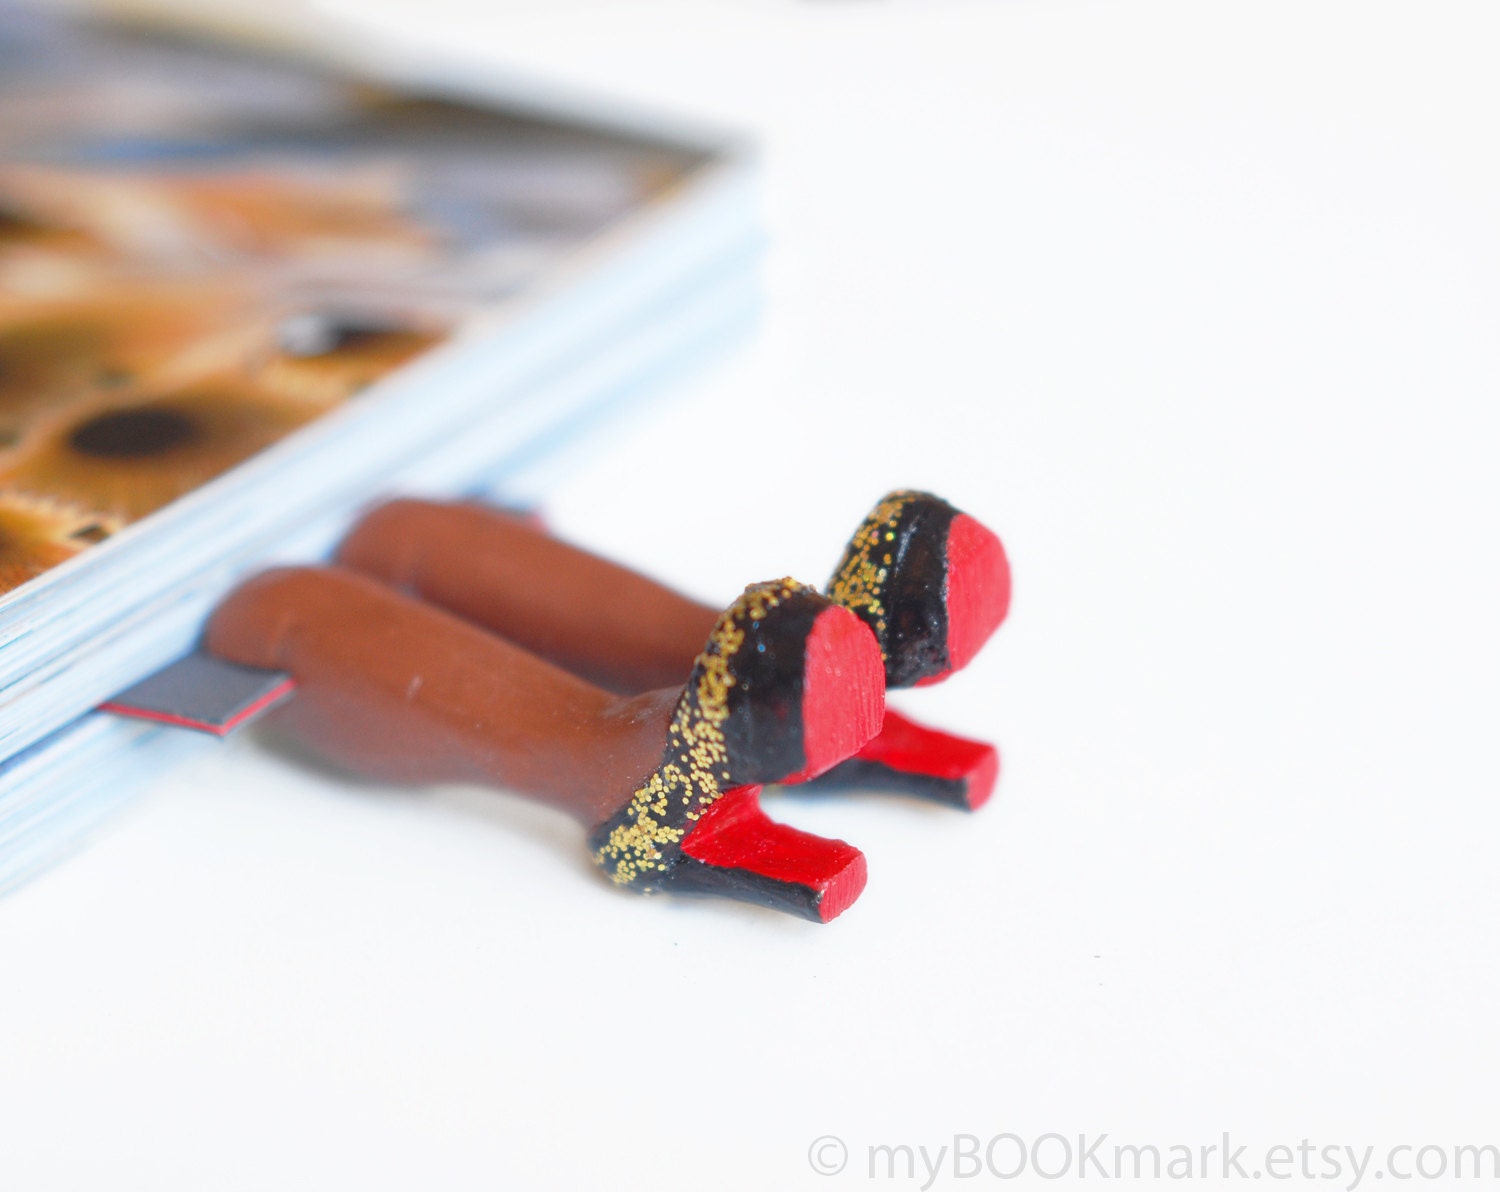 Louboutin shoes bookmark with golden glitter. Chocolate brown skin. Elegant fashion gift. Black, gold and red shoes. oht - MyBookmark